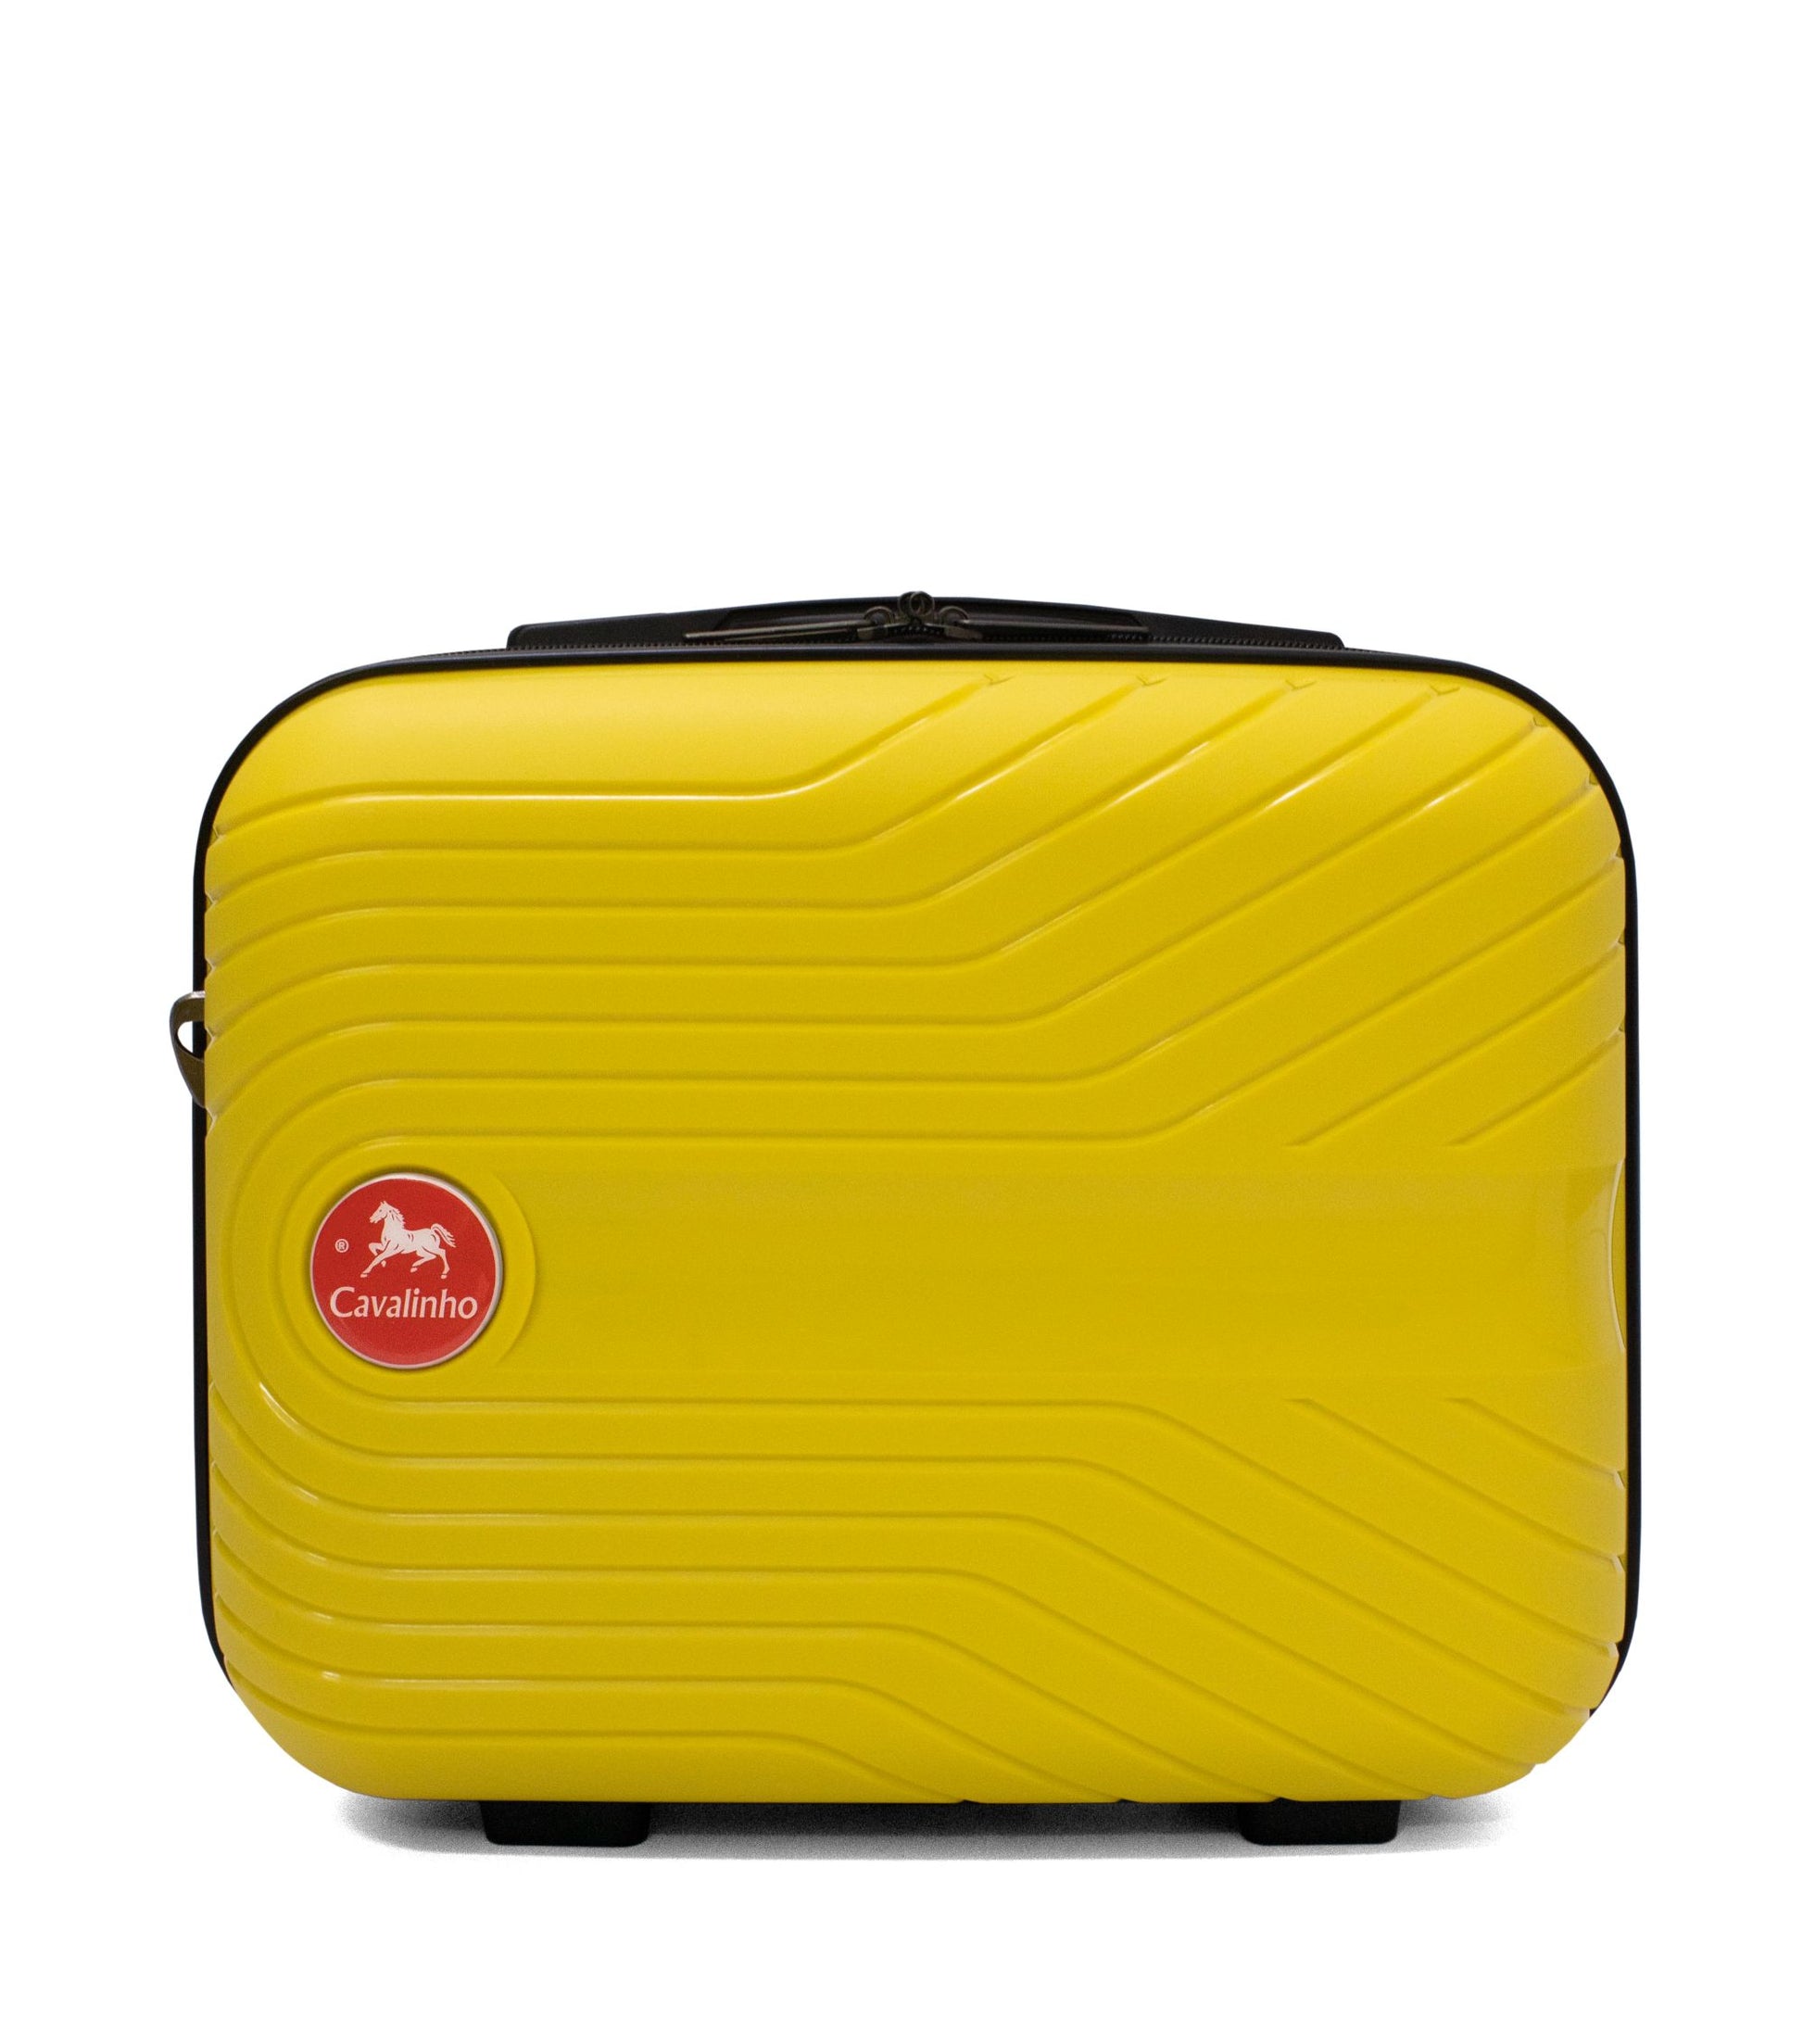 Cavalinho Colorful Hardside Toiletry Tote (15") - 15 inch Yellow - 68020004.08.15_1